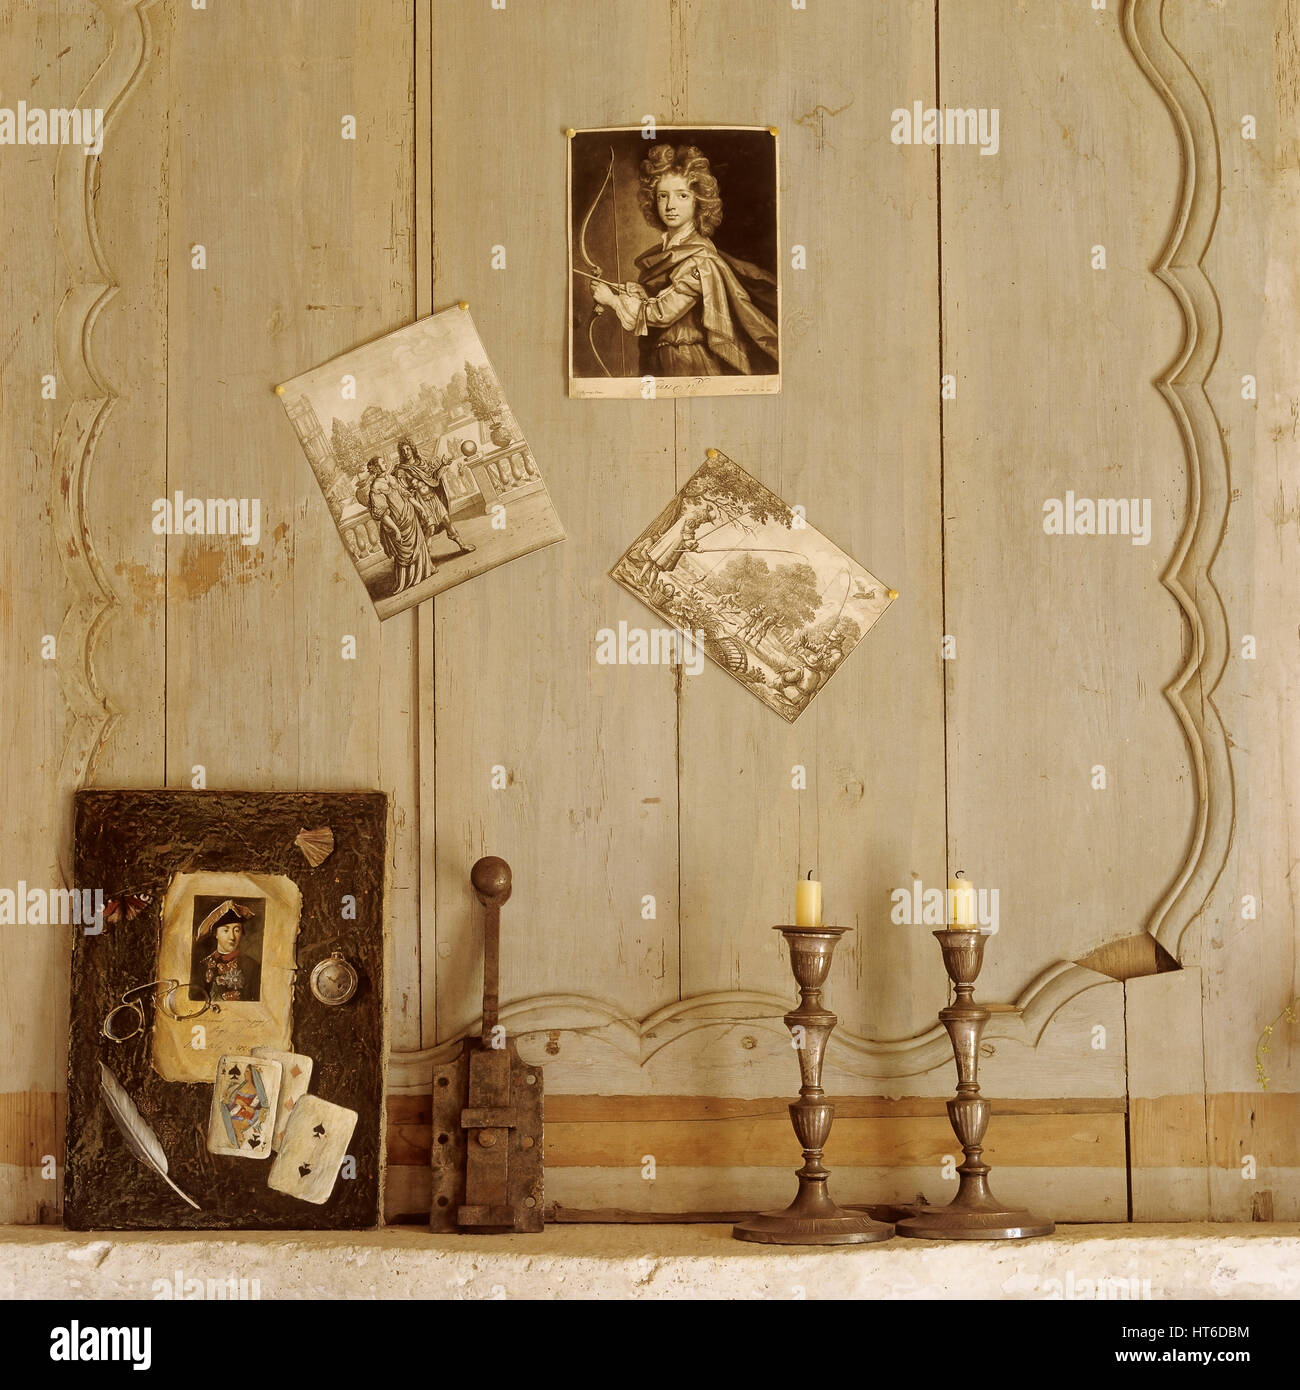 Candlesticks and painting below photographs. Stock Photo